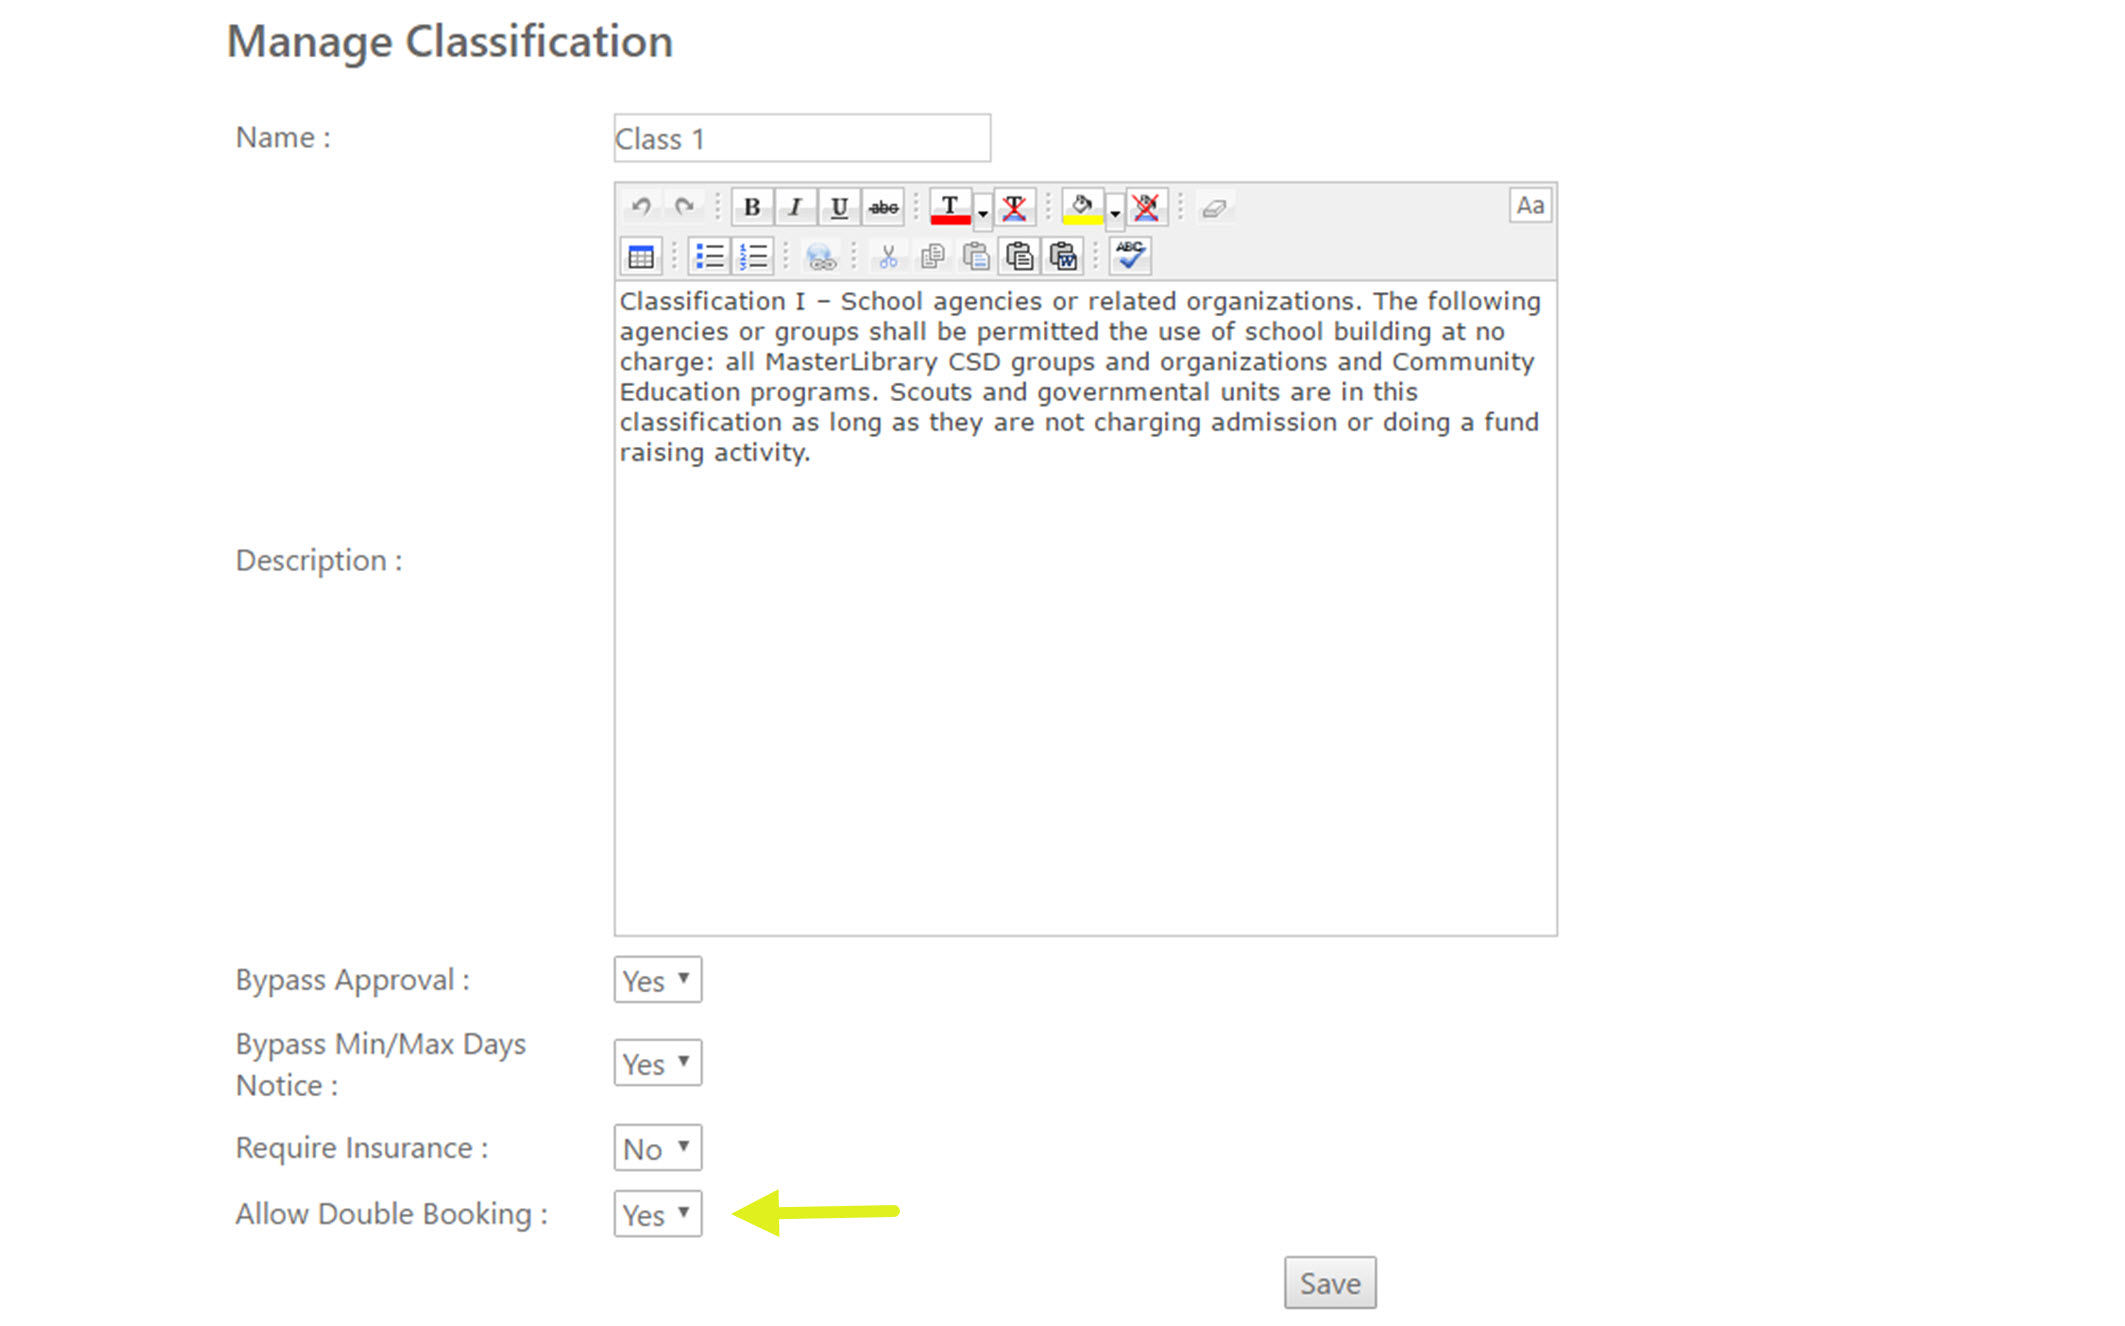 The Manage Classification screen with the Allow Double Booking field highlighted.